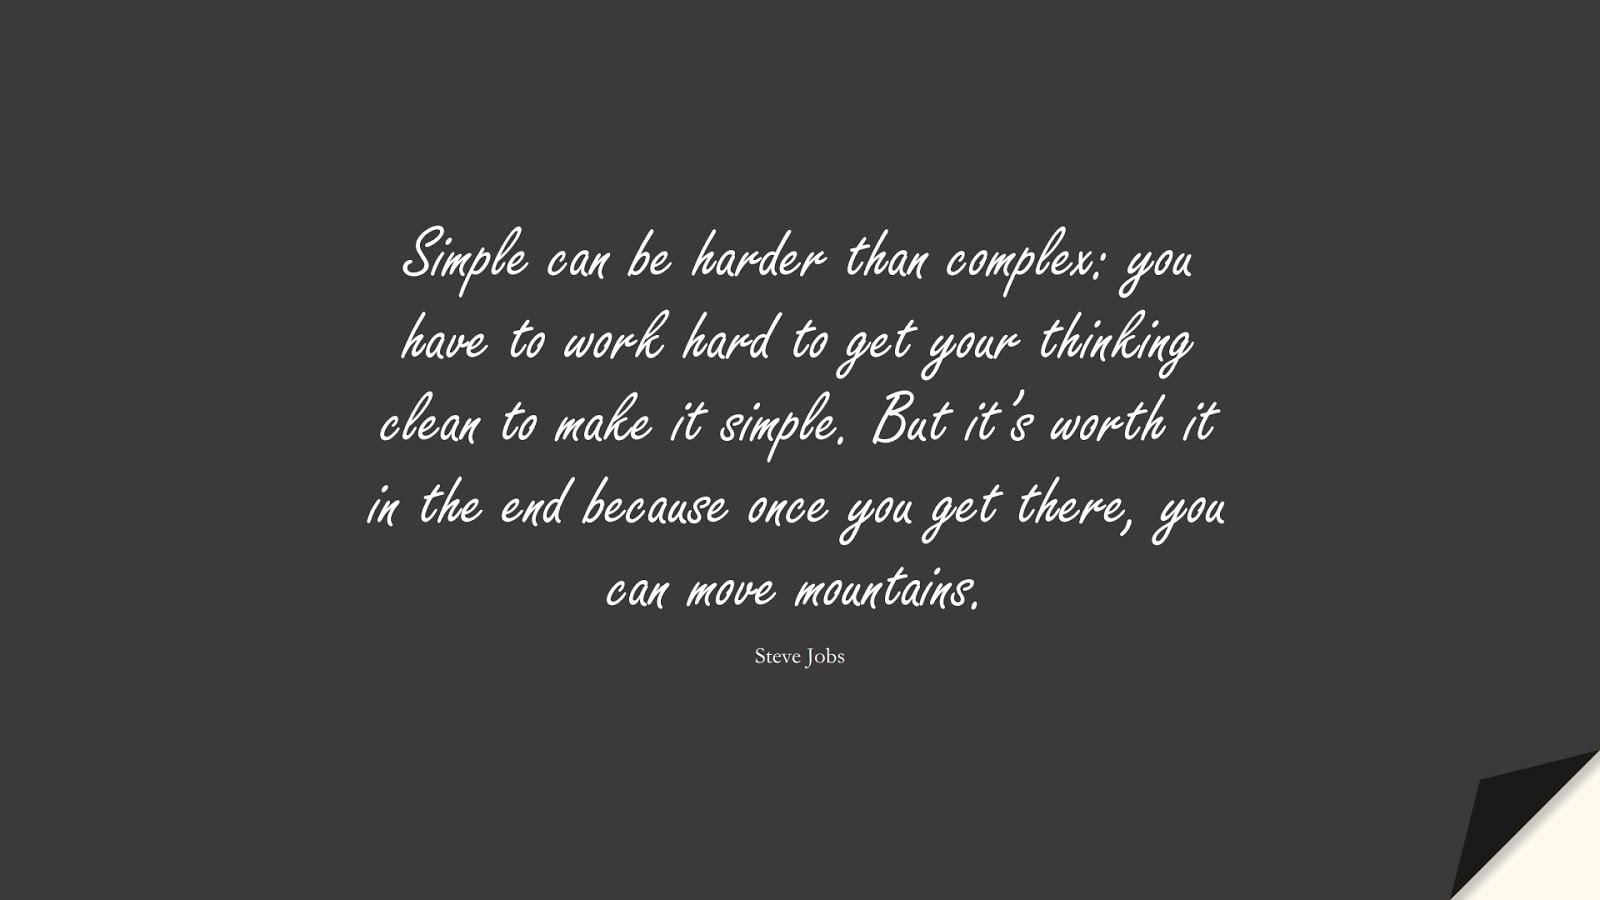 Simple can be harder than complex: you have to work hard to get your thinking clean to make it simple. But it’s worth it in the end because once you get there, you can move mountains. (Steve Jobs);  #SteveJobsQuotes